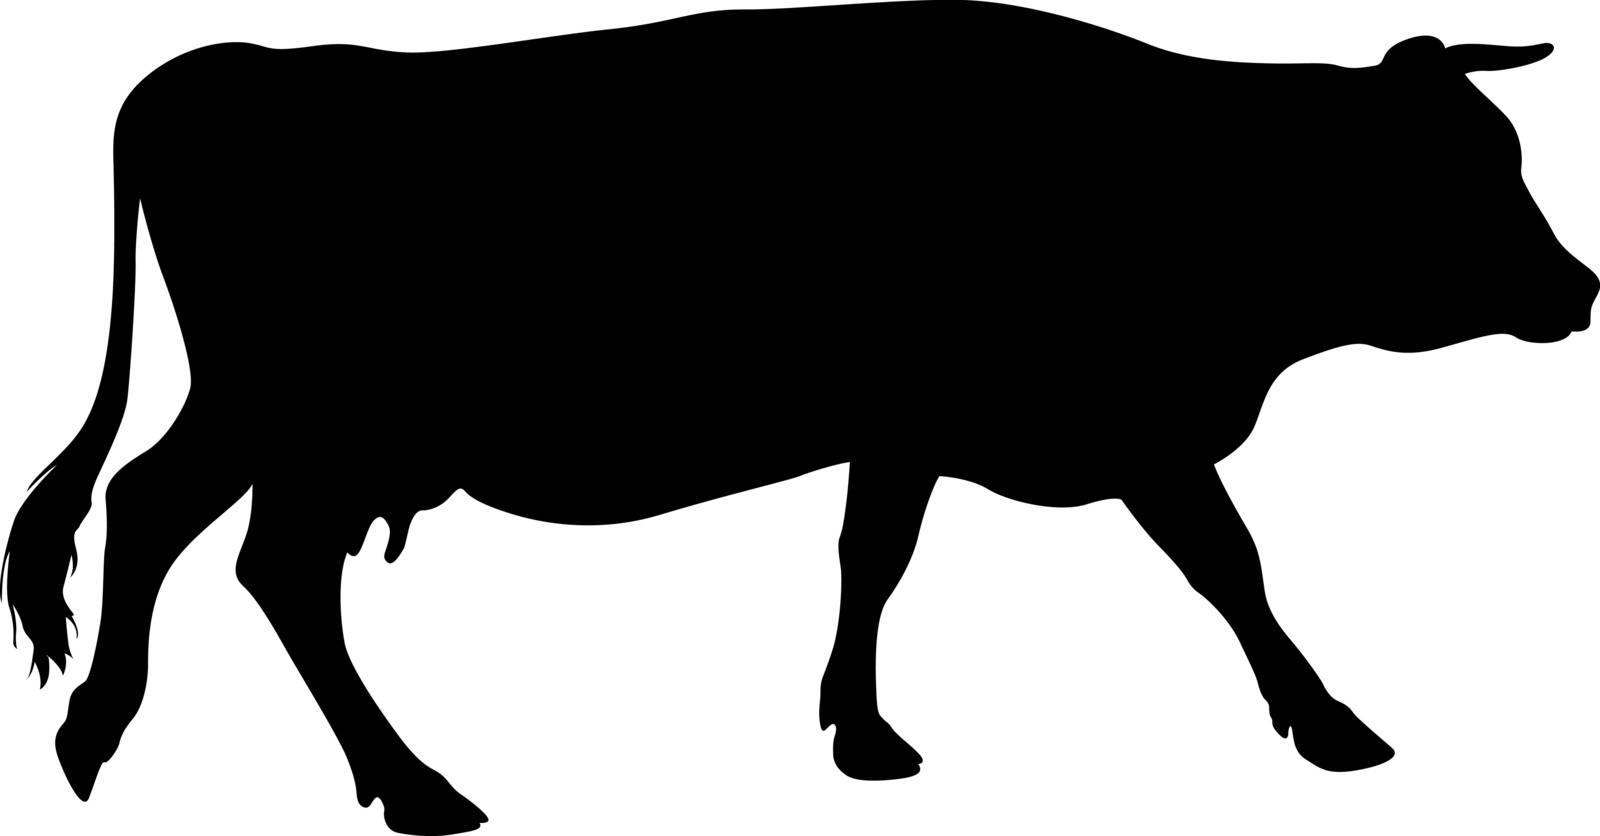 Black silhouette of cash cow on white background.